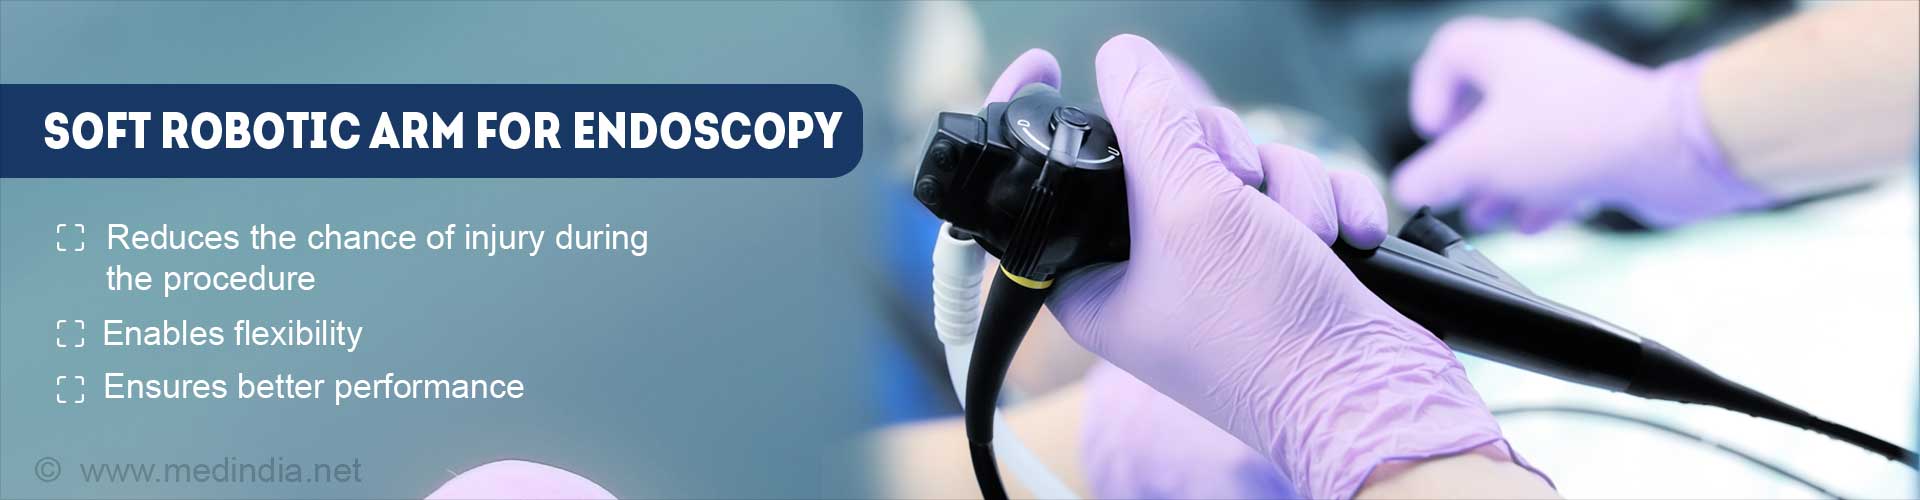 Soft robotic arm for endoscopy
- reduces the chance of injury during the procedure
- Enables flexibility
- Ensures better performance